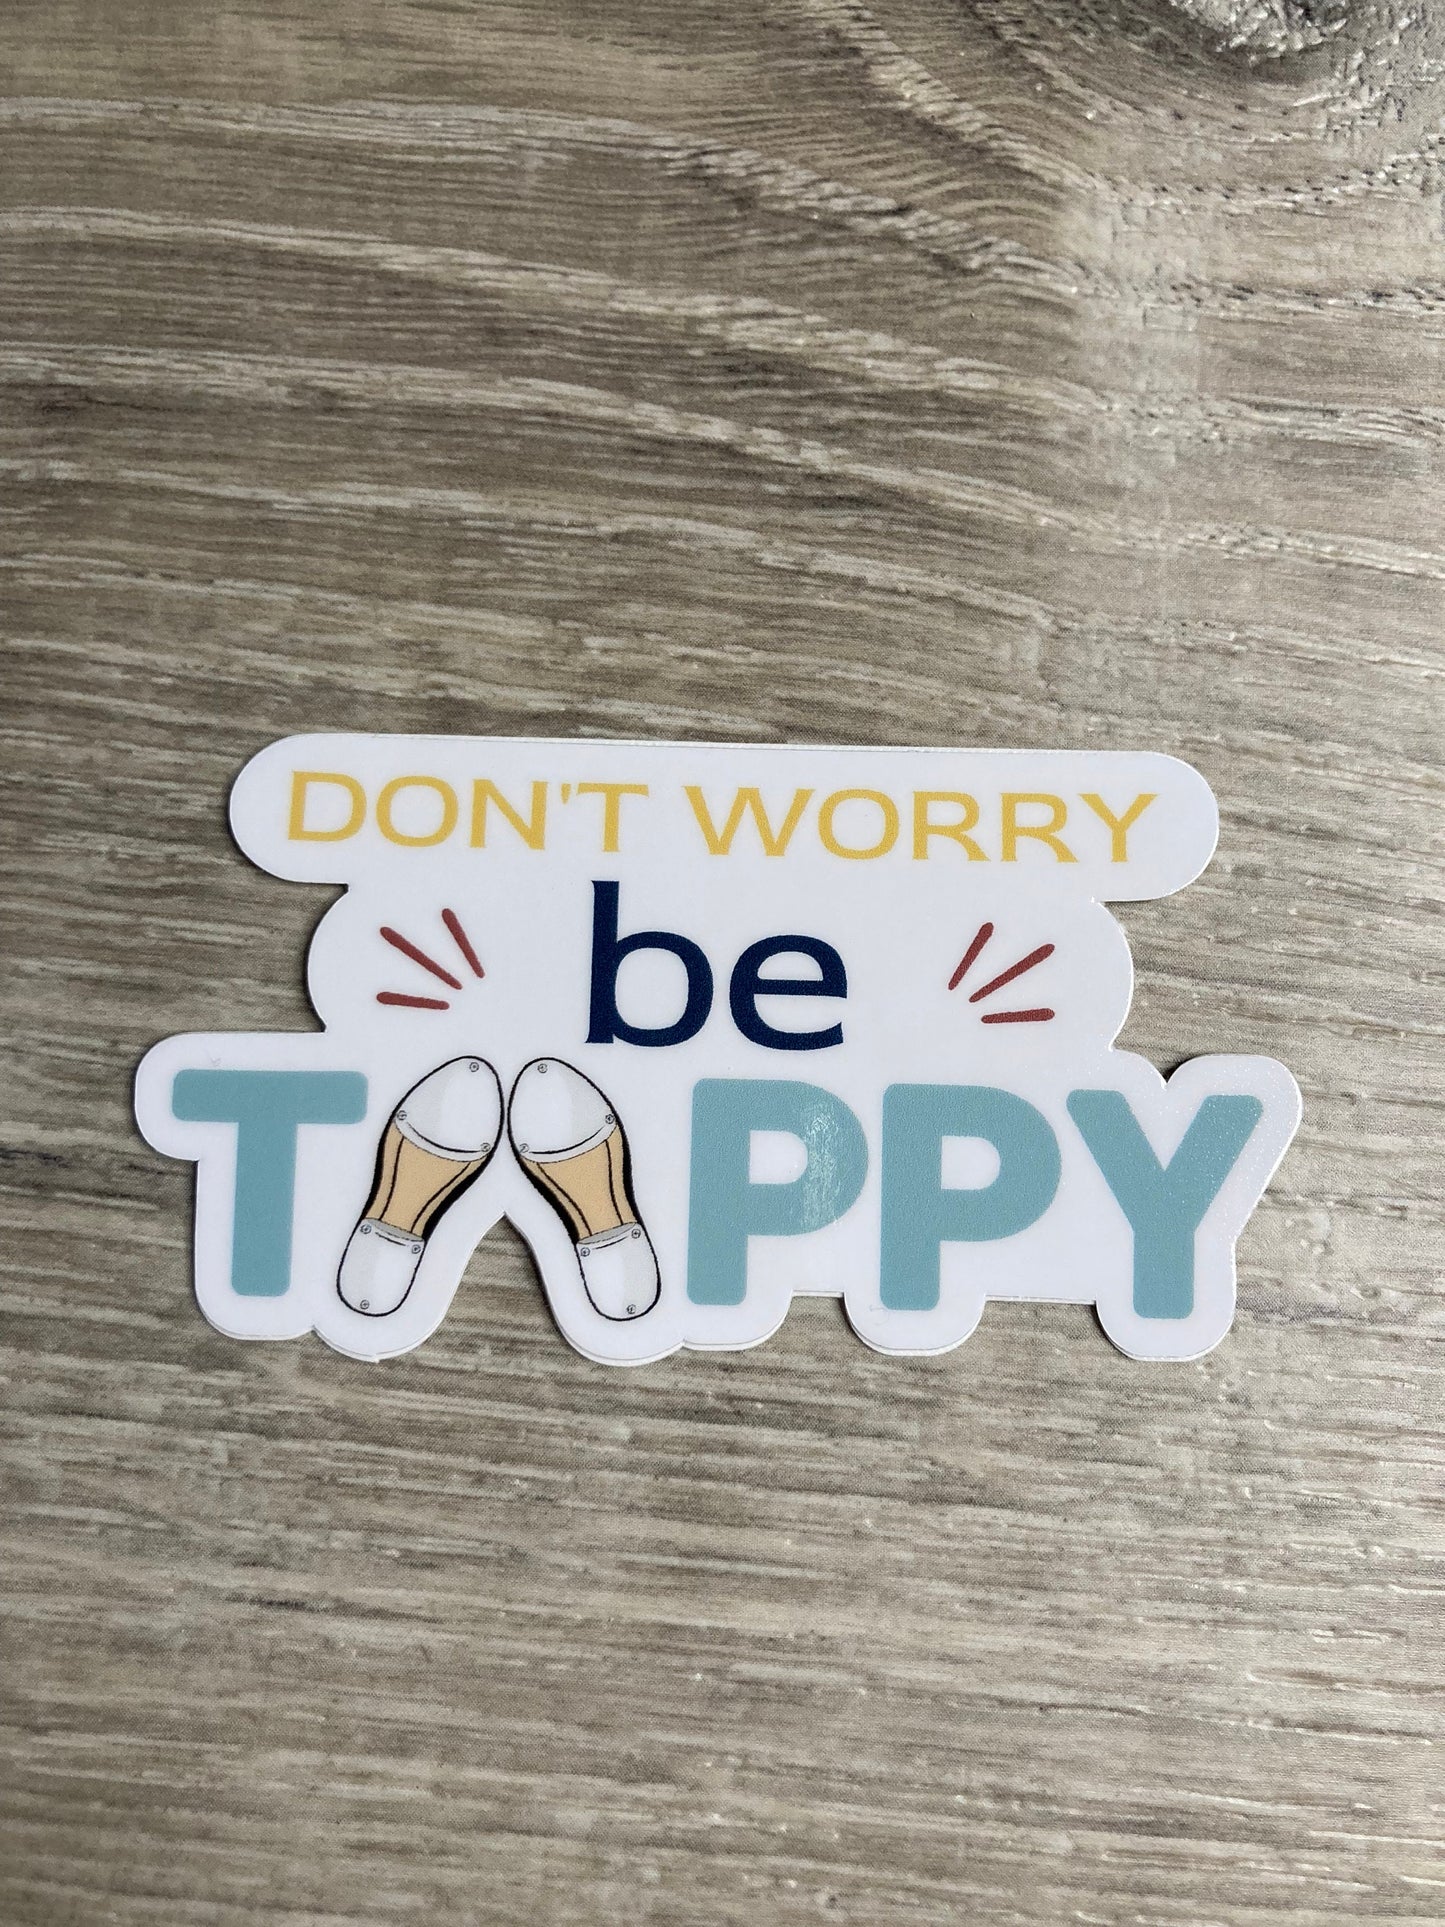 Don't Worry, Be Tappy V2 Vinyl Dance Sticker, Vinyl Decal, Laptop Sticker, Dance Sticker, Gifts For Dancers, Ballet Gifts